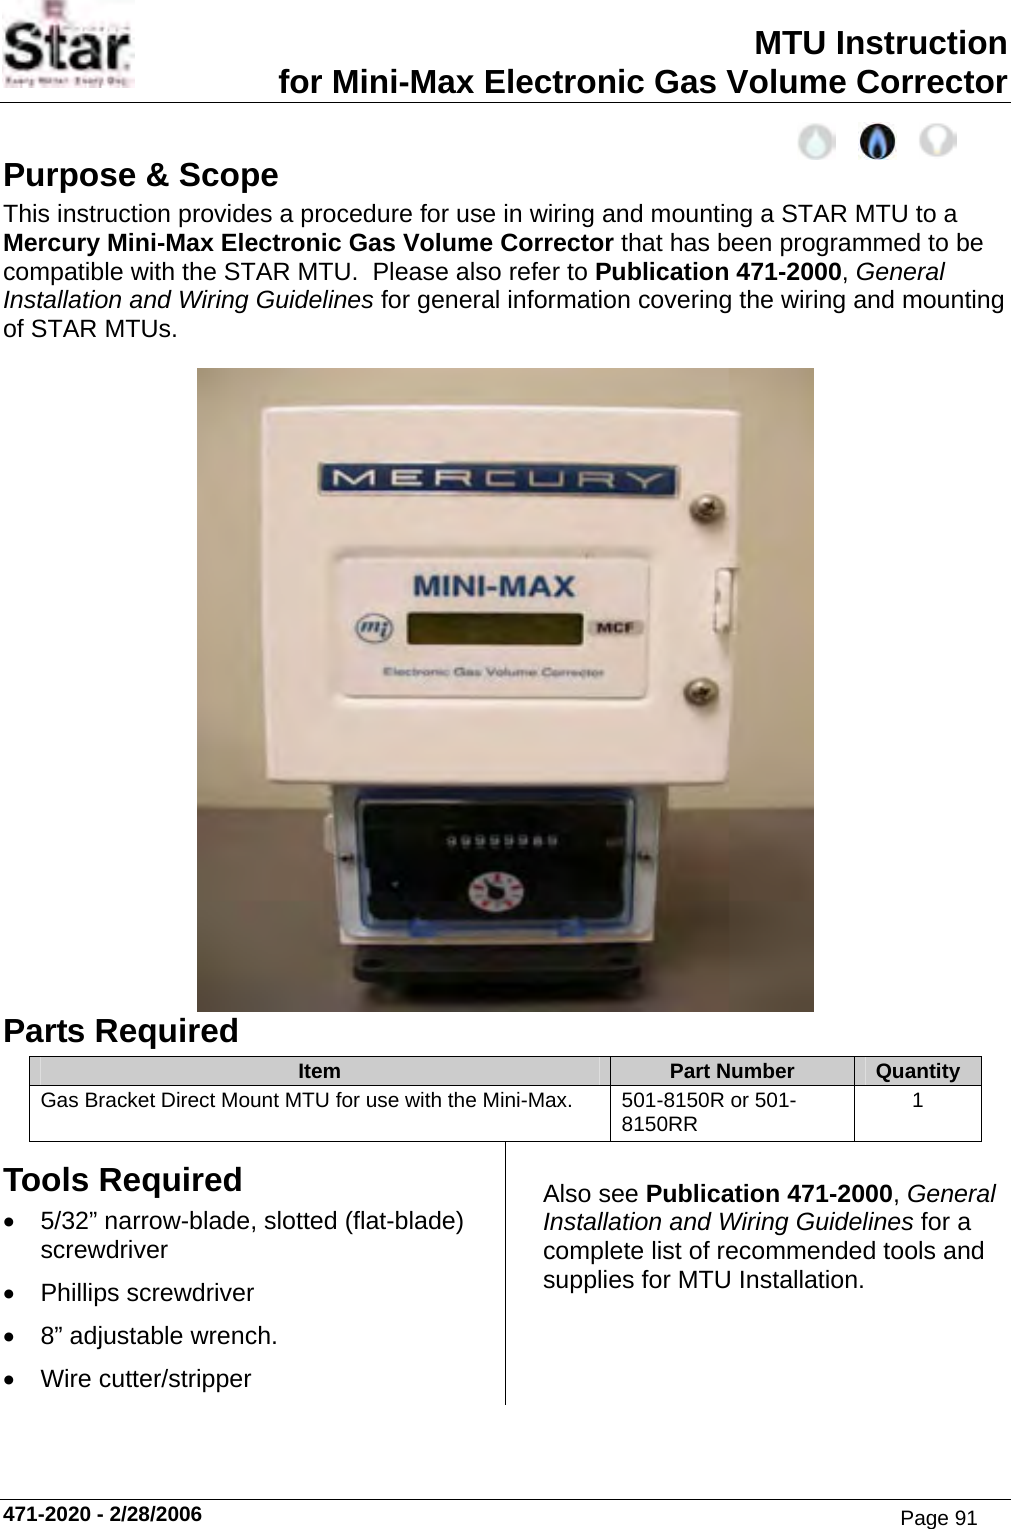 MTU Instruction for Mini-Max Electronic Gas Volume Corrector Purpose &amp; Scope This instruction provides a procedure for use in wiring and mounting a STAR MTU to a Mercury Mini-Max Electronic Gas Volume Corrector that has been programmed to be compatible with the STAR MTU.  Please also refer to Publication 471-2000, General Installation and Wiring Guidelines for general information covering the wiring and mounting of STAR MTUs.  Parts Required Item  Part Number  Quantity Gas Bracket Direct Mount MTU for use with the Mini-Max. 501-8150R or 501-8150RR  1 Tools Required • 5/32” narrow-blade, slotted (flat-blade) screwdriver • Phillips screwdriver •  8” adjustable wrench. • Wire cutter/stripper Also see Publication 471-2000, General Installation and Wiring Guidelines for a complete list of recommended tools and supplies for MTU Installation. 471-2020 - 2/28/2006 Page 91